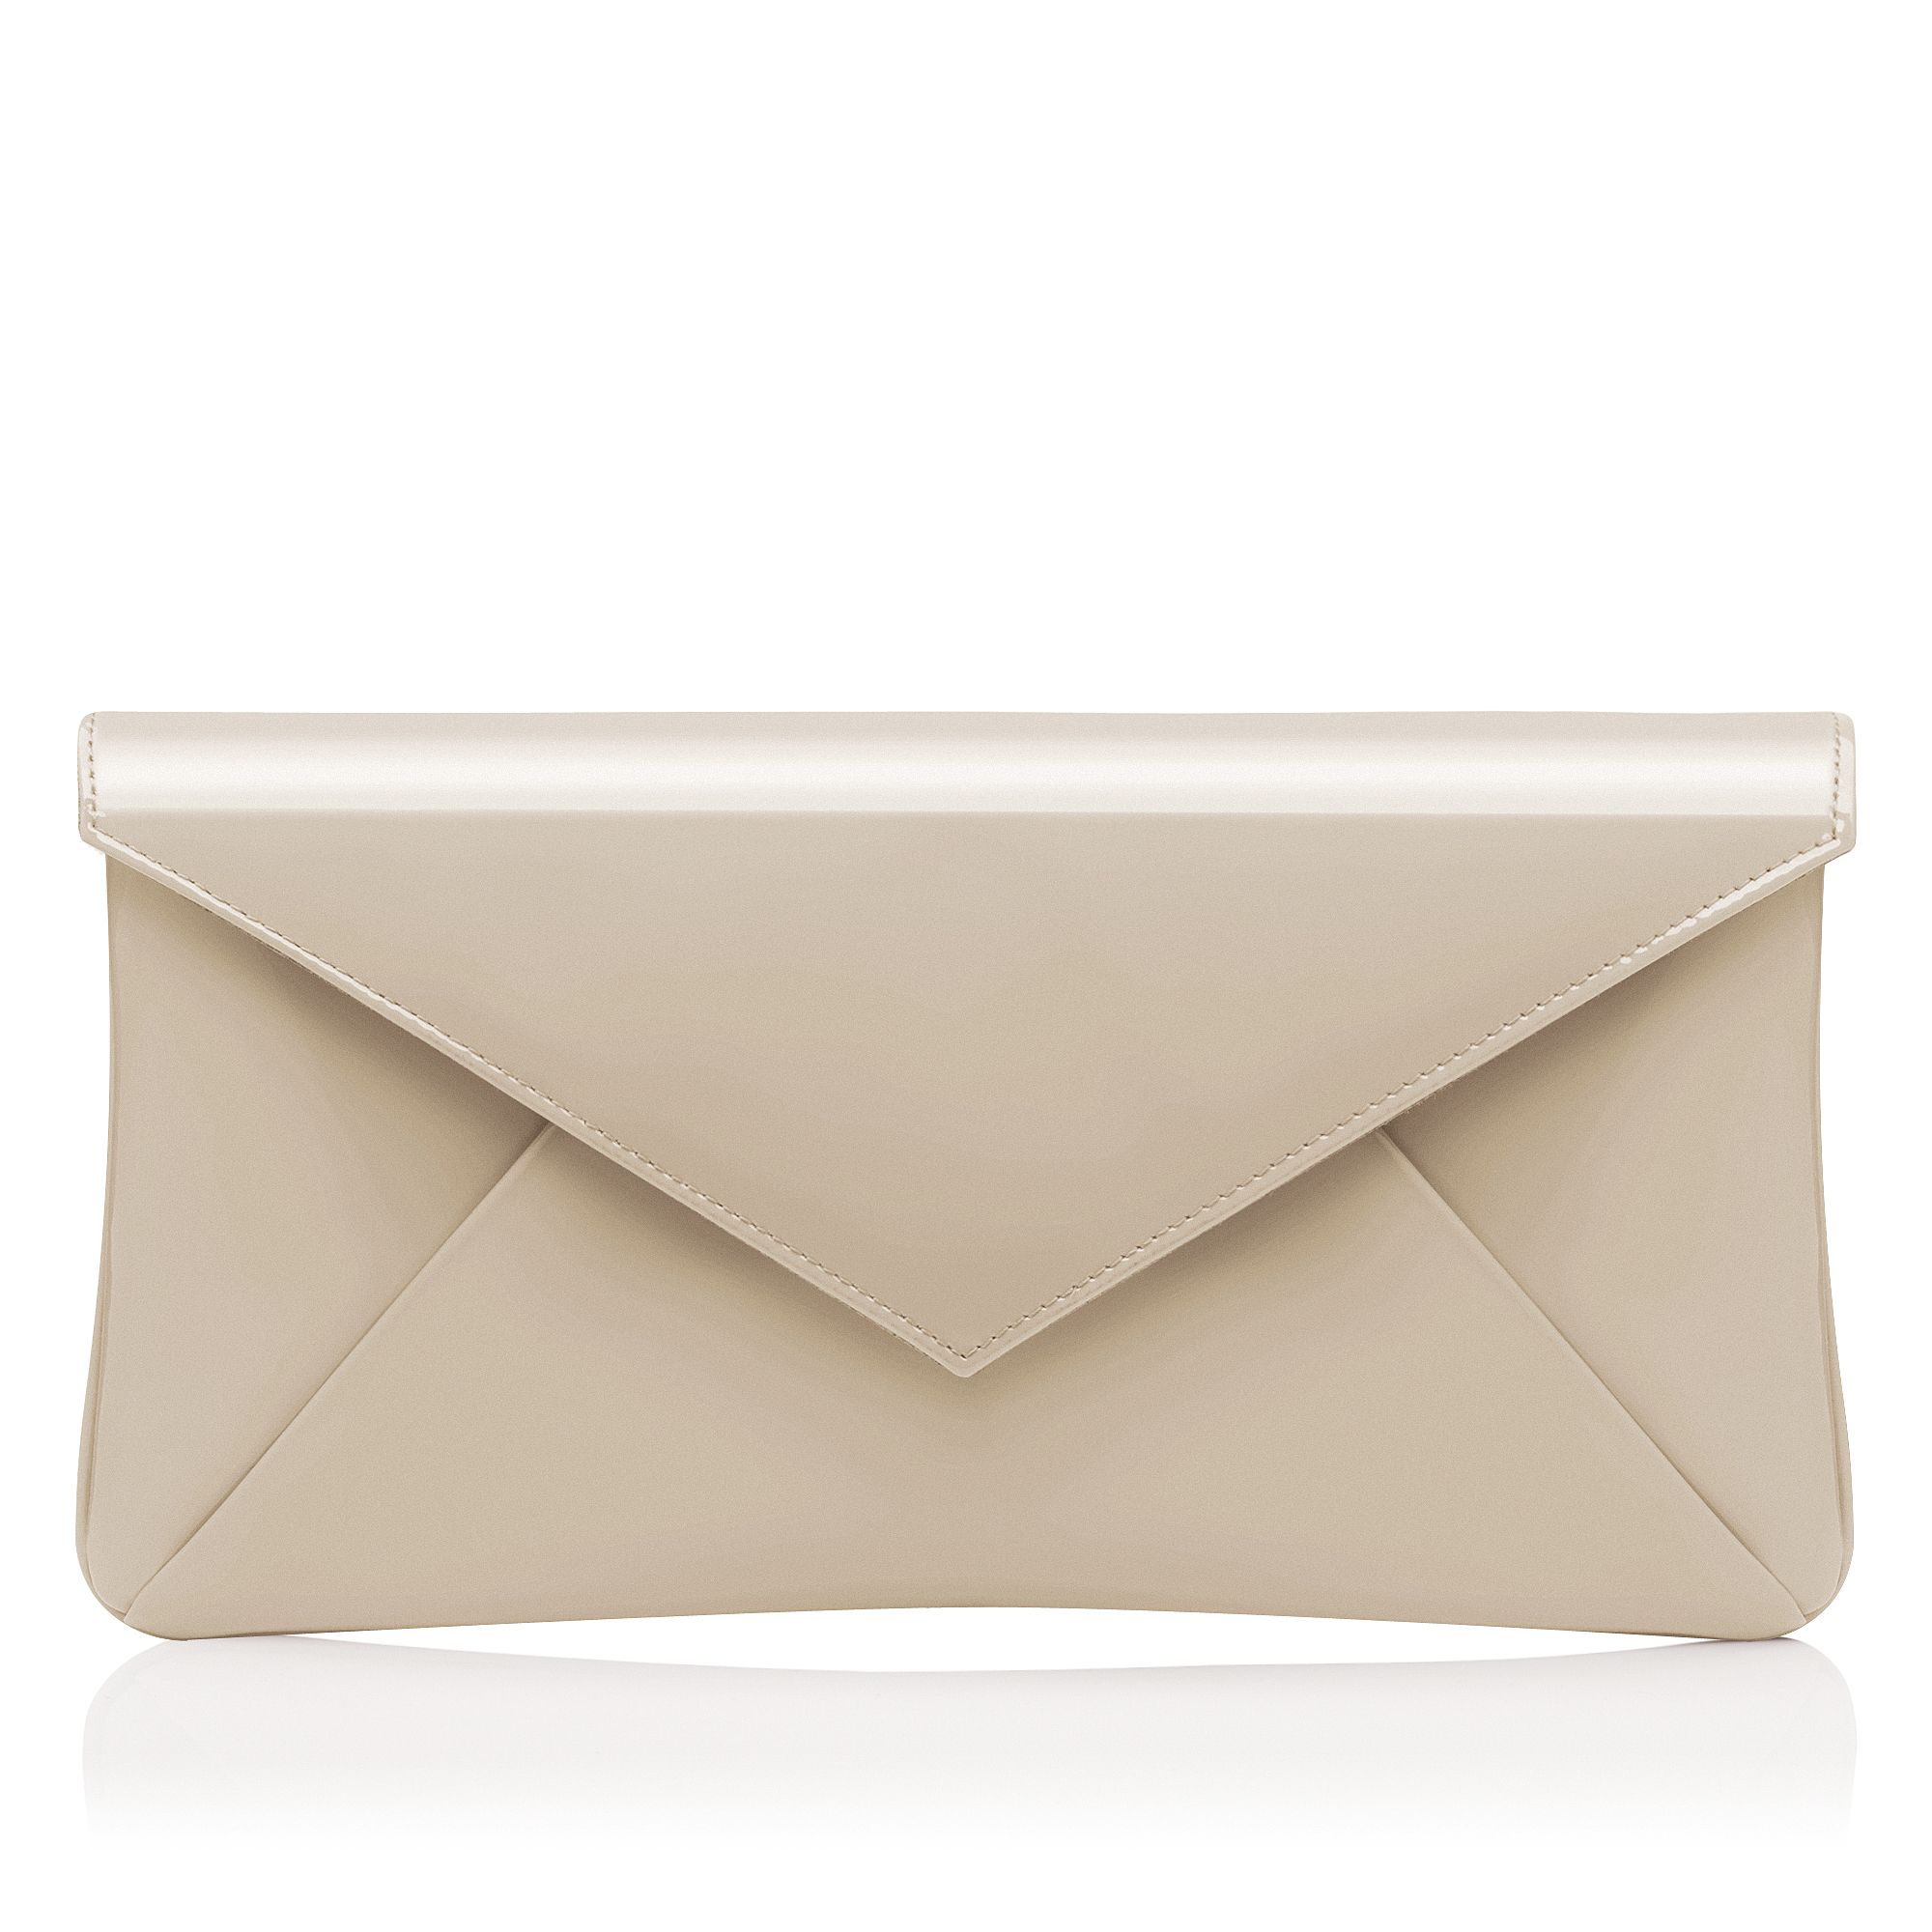 www.bagssaleusa.com Leola Patent Leather Clutch Bag in Beige (off white) | Lyst